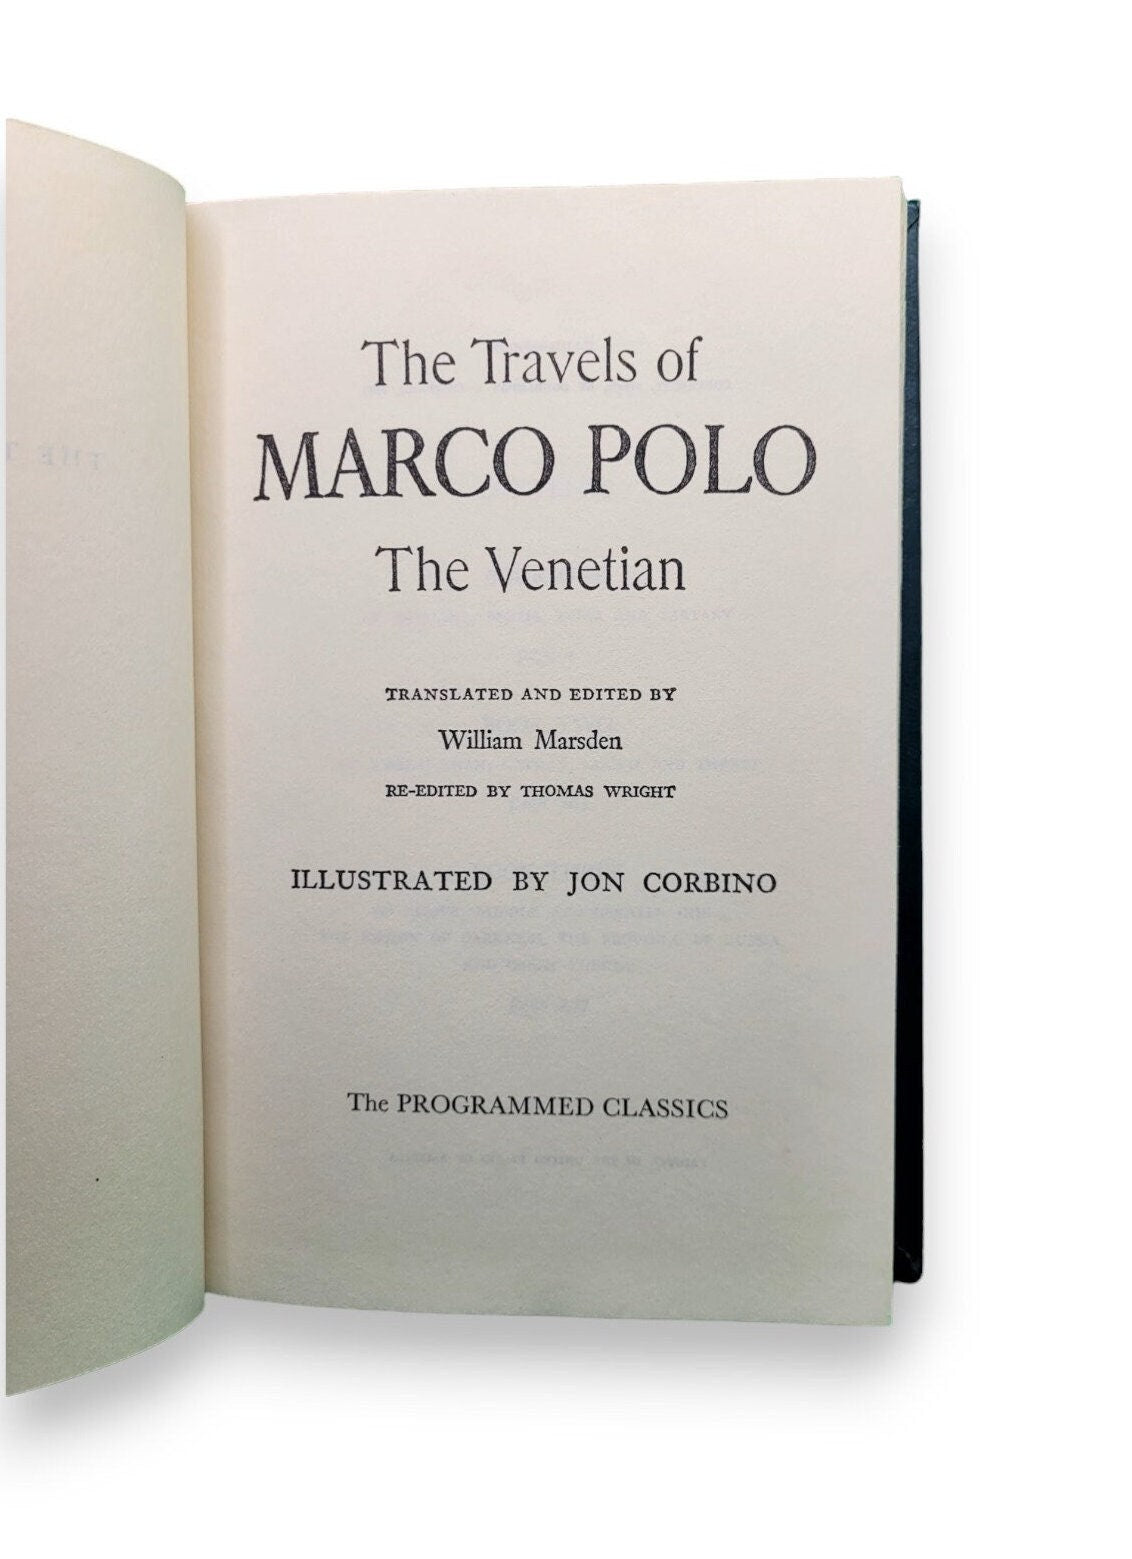 The Travels of Marco Polo: The Venetian by William Marsden 1948